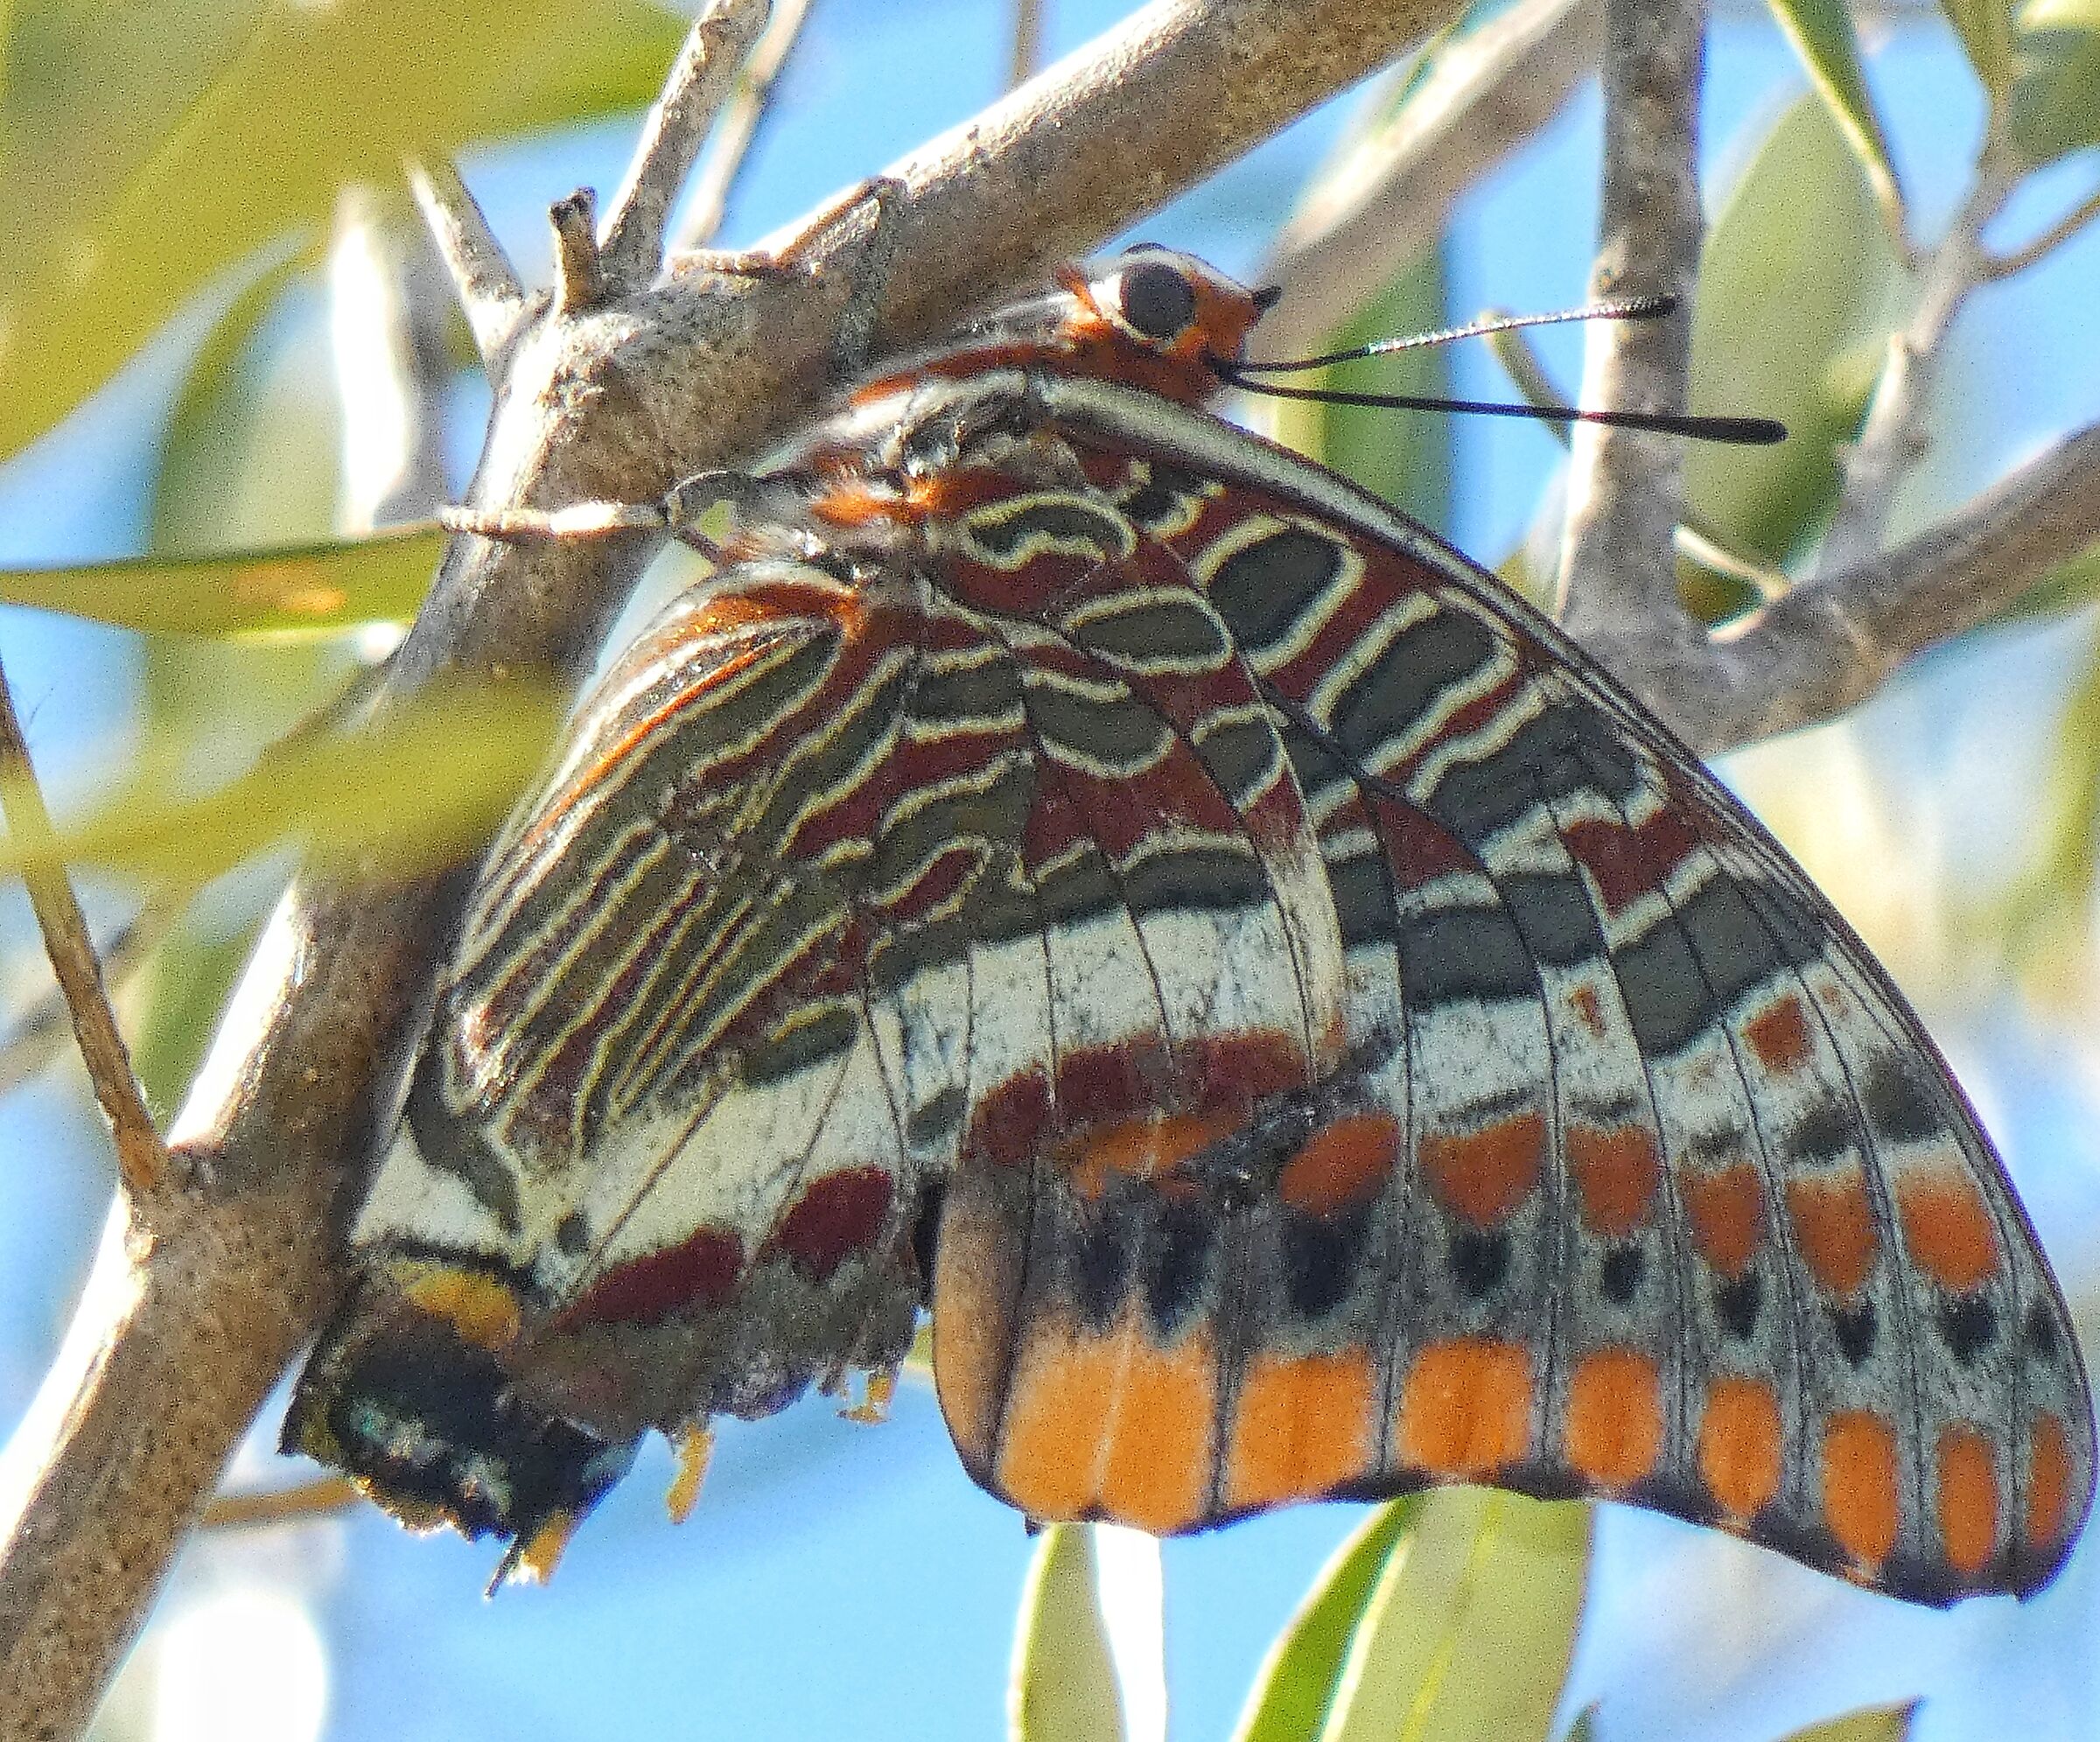 Charaxes jasius, nymph of the strawberry tree. Olbia, 16 August...